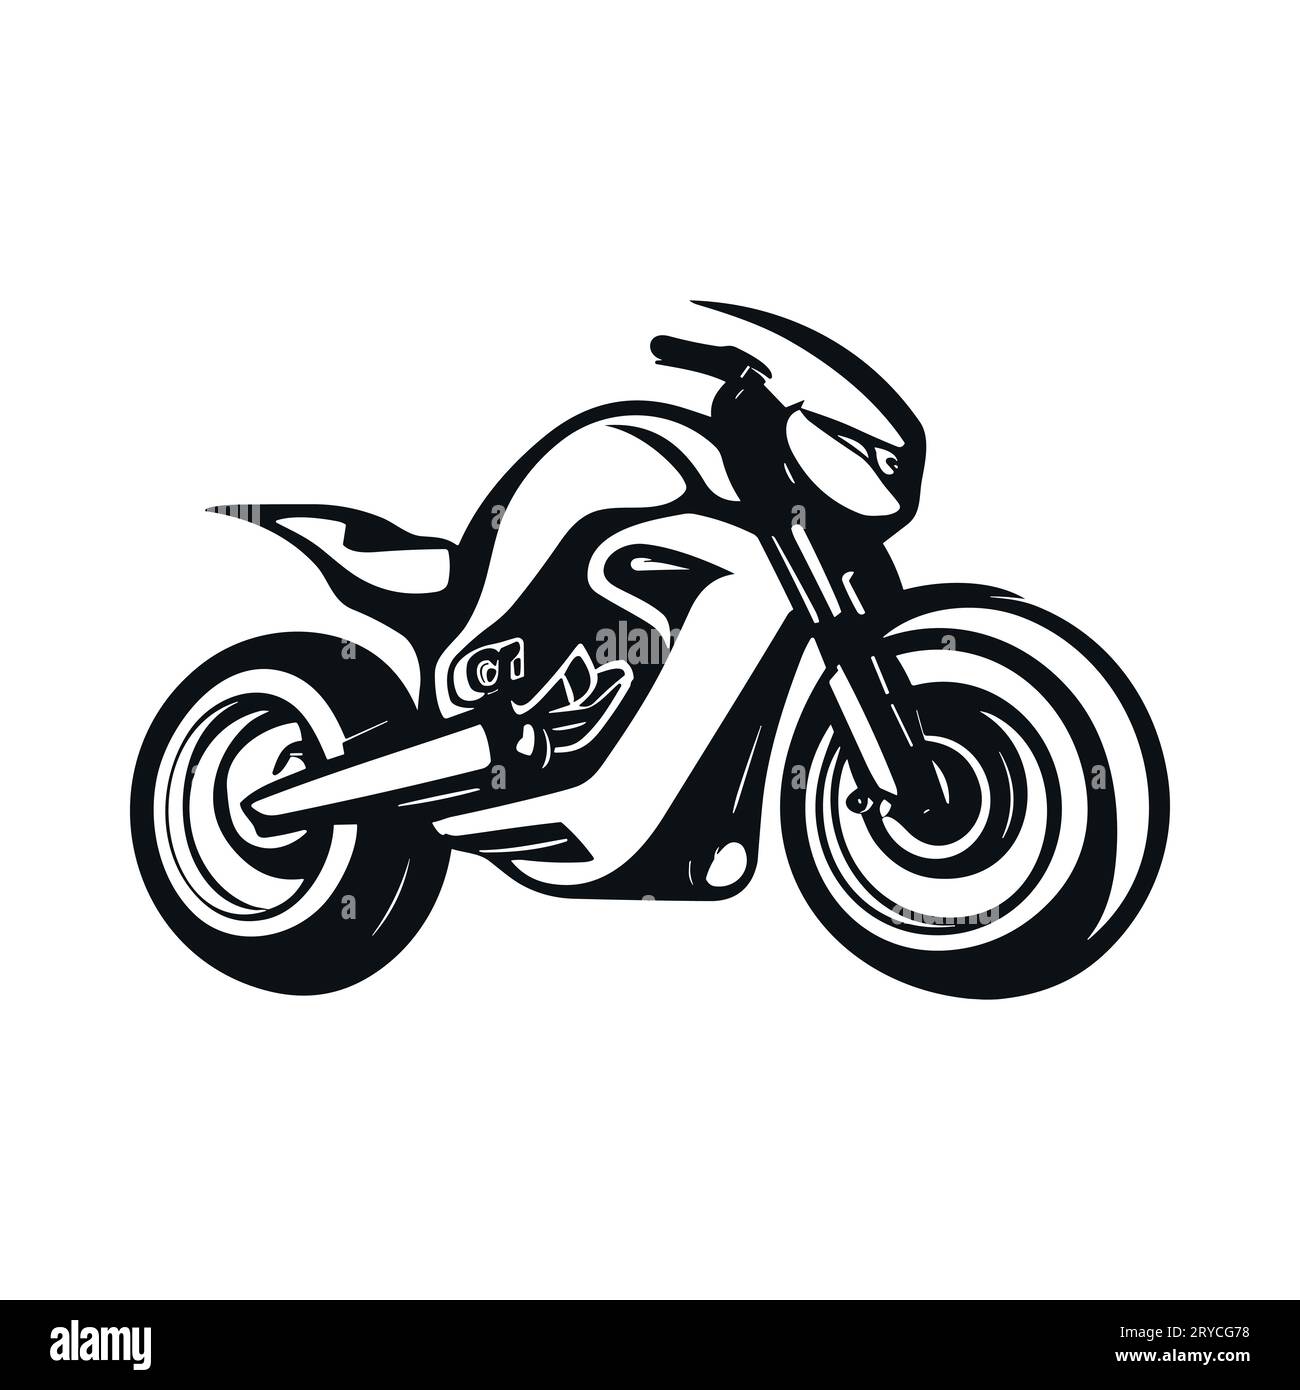 Road motorcycle, abstract vector silhouette, motor sport logo Stock Vector